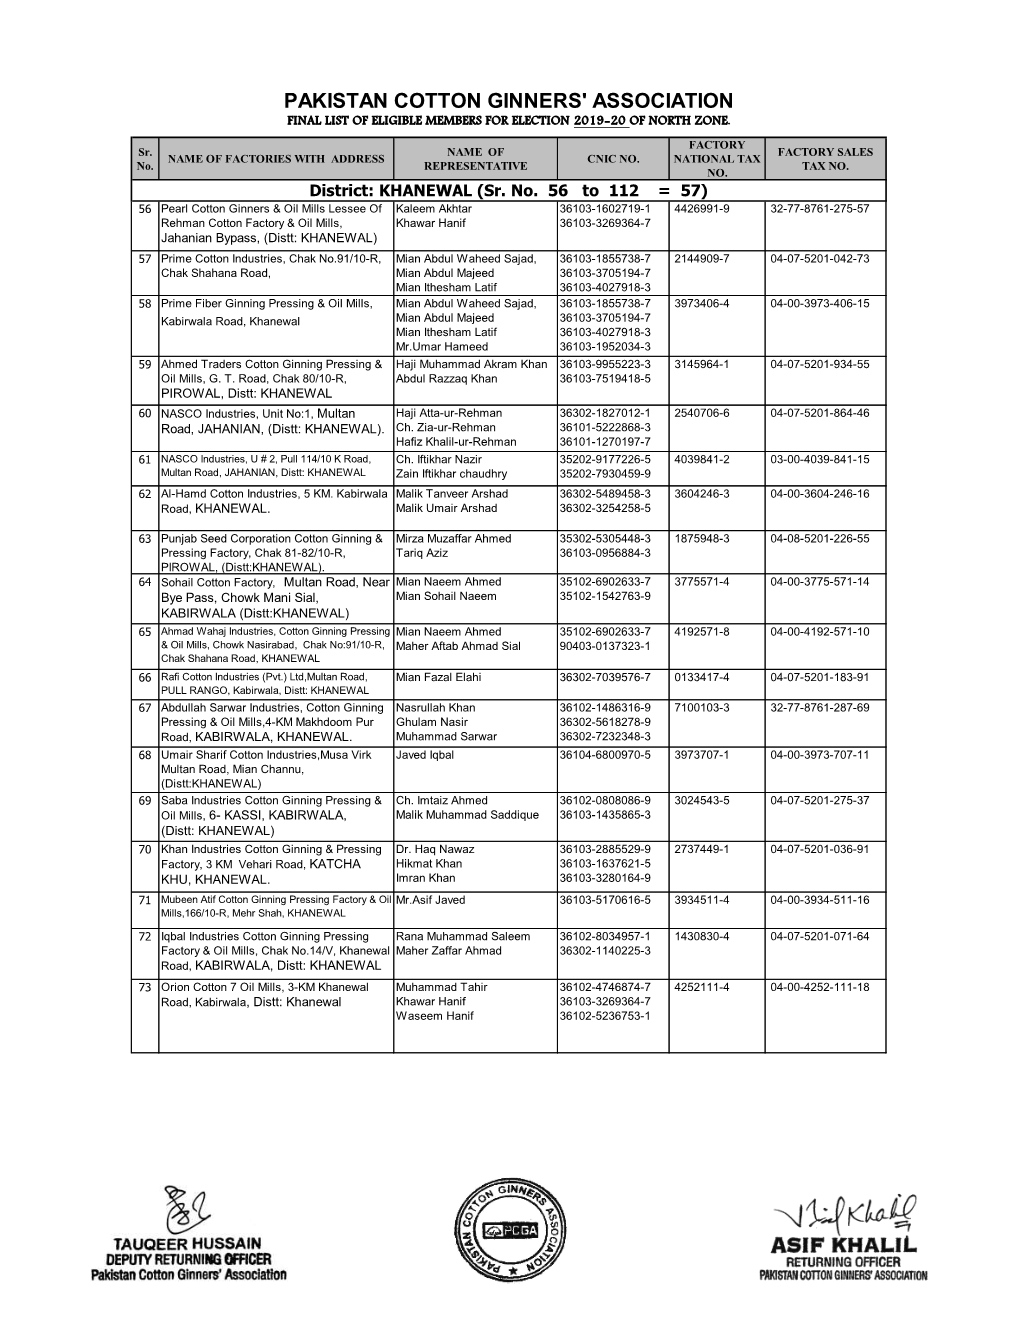 3-List-Of-Members-For-North-Zone-Khanewal-2019-20.Pdf